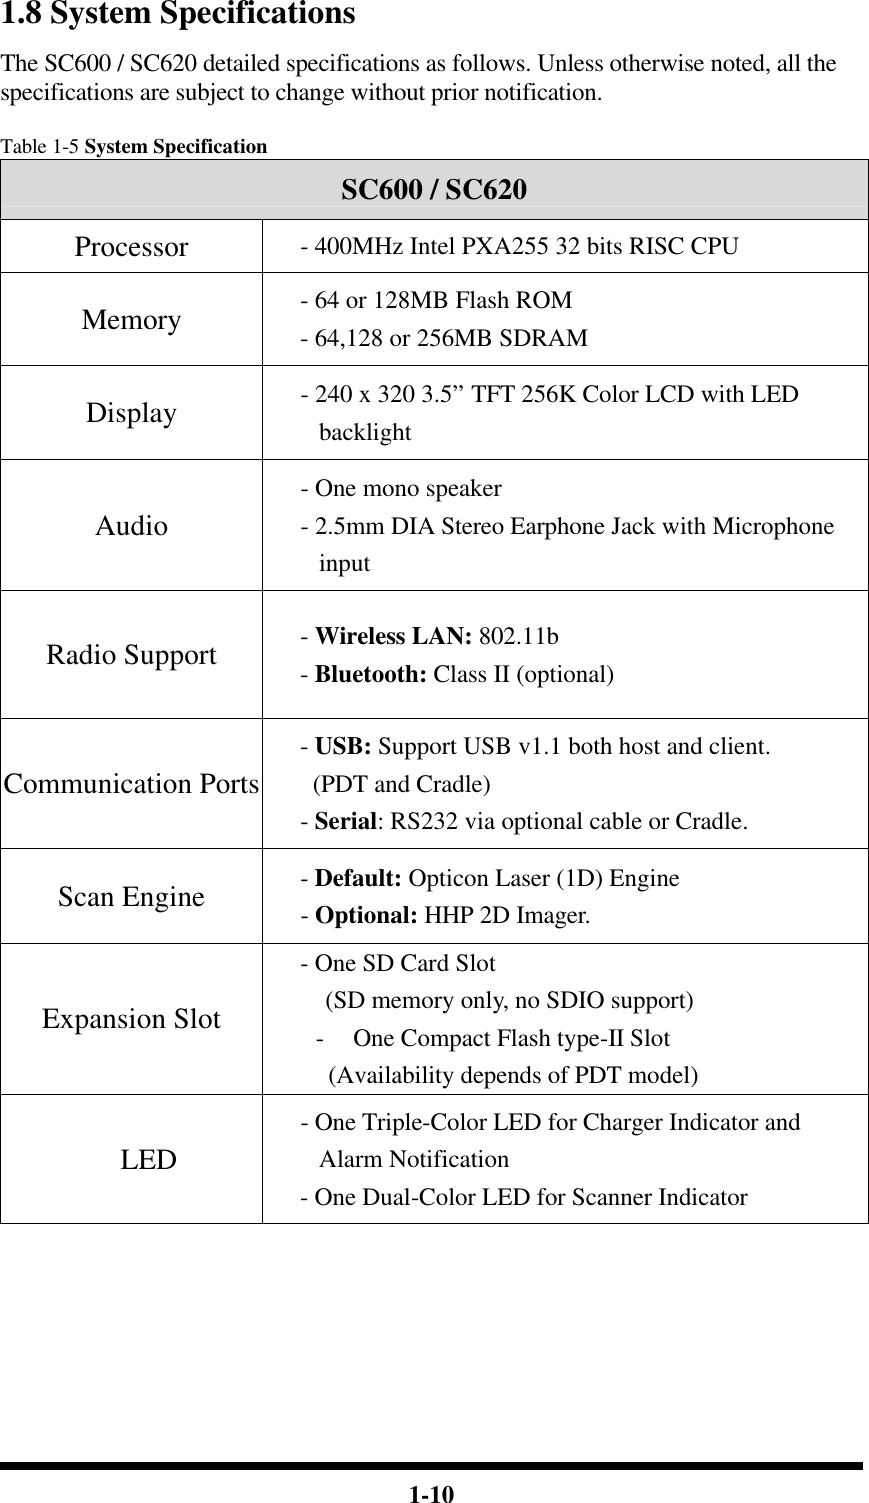  1-10 1.8 System Specifications The SC600 / SC620 detailed specifications as follows. Unless otherwise noted, all the specifications are subject to change without prior notification.  Table 1-5 System Specification SC600 / SC620 Processor - 400MHz Intel PXA255 32 bits RISC CPU Memory - 64 or 128MB Flash ROM - 64,128 or 256MB SDRAM Display - 240 x 320 3.5” TFT 256K Color LCD with LED backlight Audio - One mono speaker - 2.5mm DIA Stereo Earphone Jack with Microphone input Radio Support - Wireless LAN: 802.11b - Bluetooth: Class II (optional) Communication Ports - USB: Support USB v1.1 both host and client. (PDT and Cradle) - Serial: RS232 via optional cable or Cradle. Scan Engine - Default: Opticon Laser (1D) Engine - Optional: HHP 2D Imager. Expansion Slot - One SD Card Slot (SD memory only, no SDIO support) - One Compact Flash type-II Slot (Availability depends of PDT model) LED - One Triple-Color LED for Charger Indicator and Alarm Notification - One Dual-Color LED for Scanner Indicator 